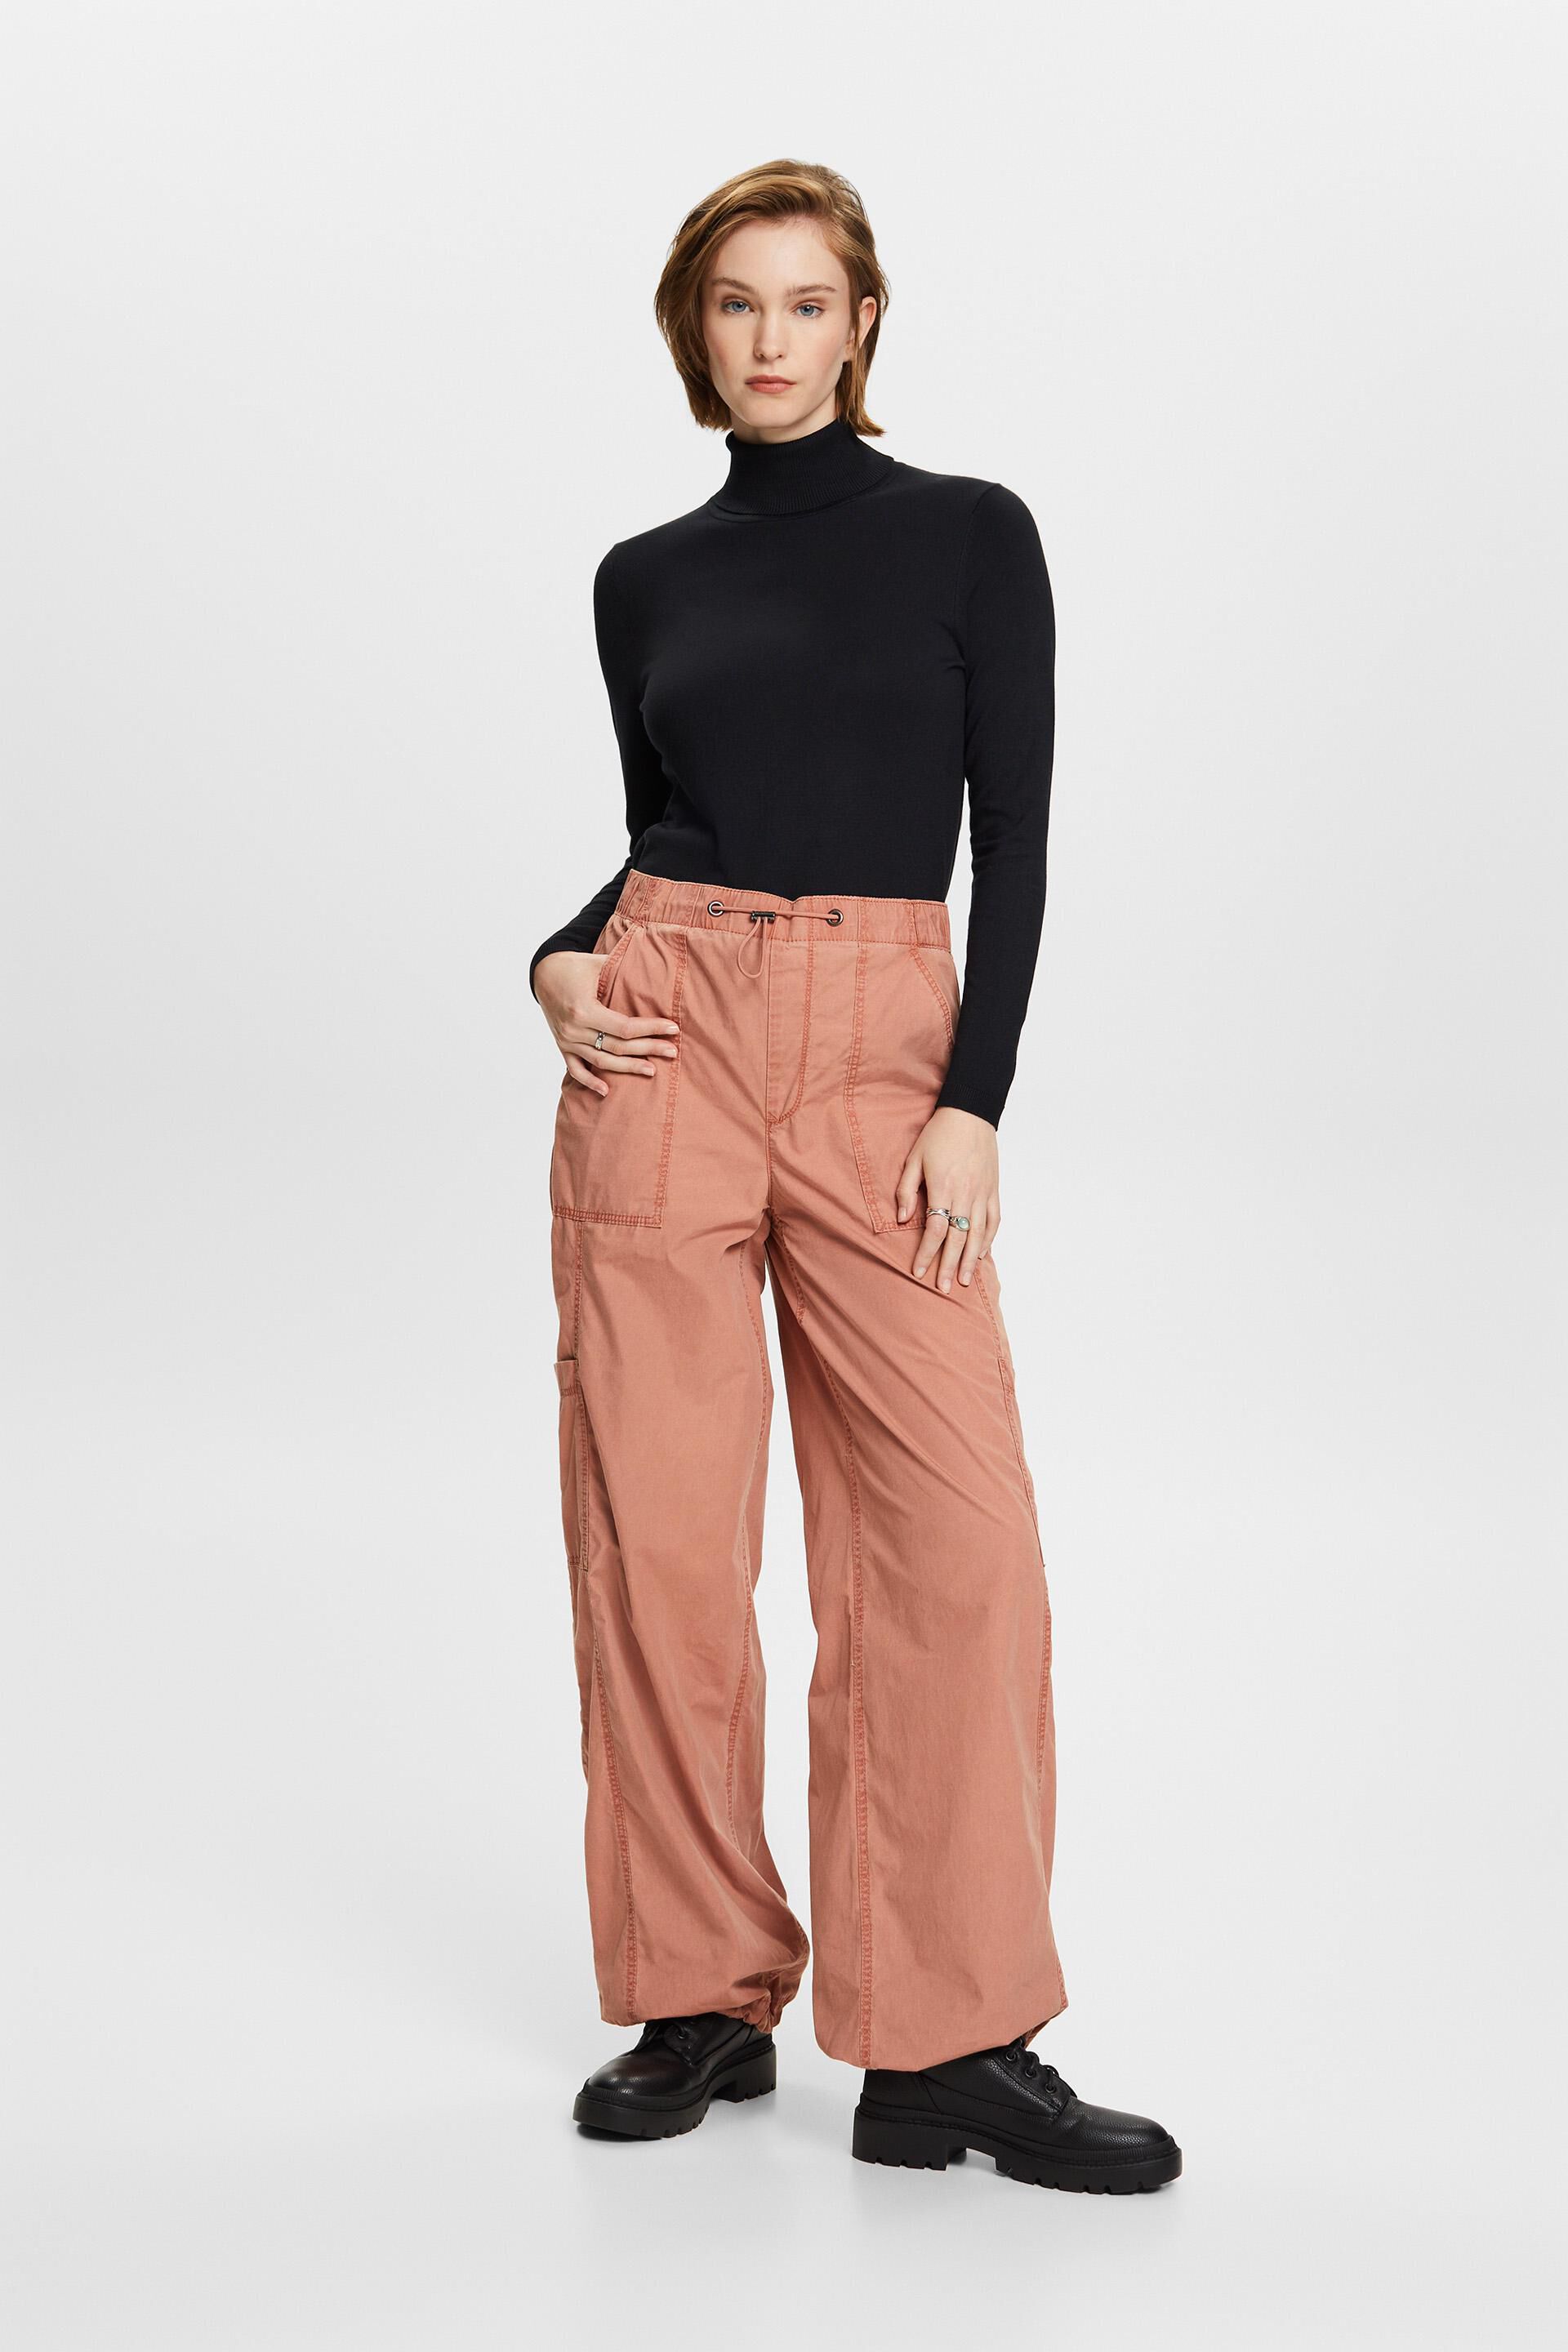 Esprit trousers, 100% cargo Pull-on cotton